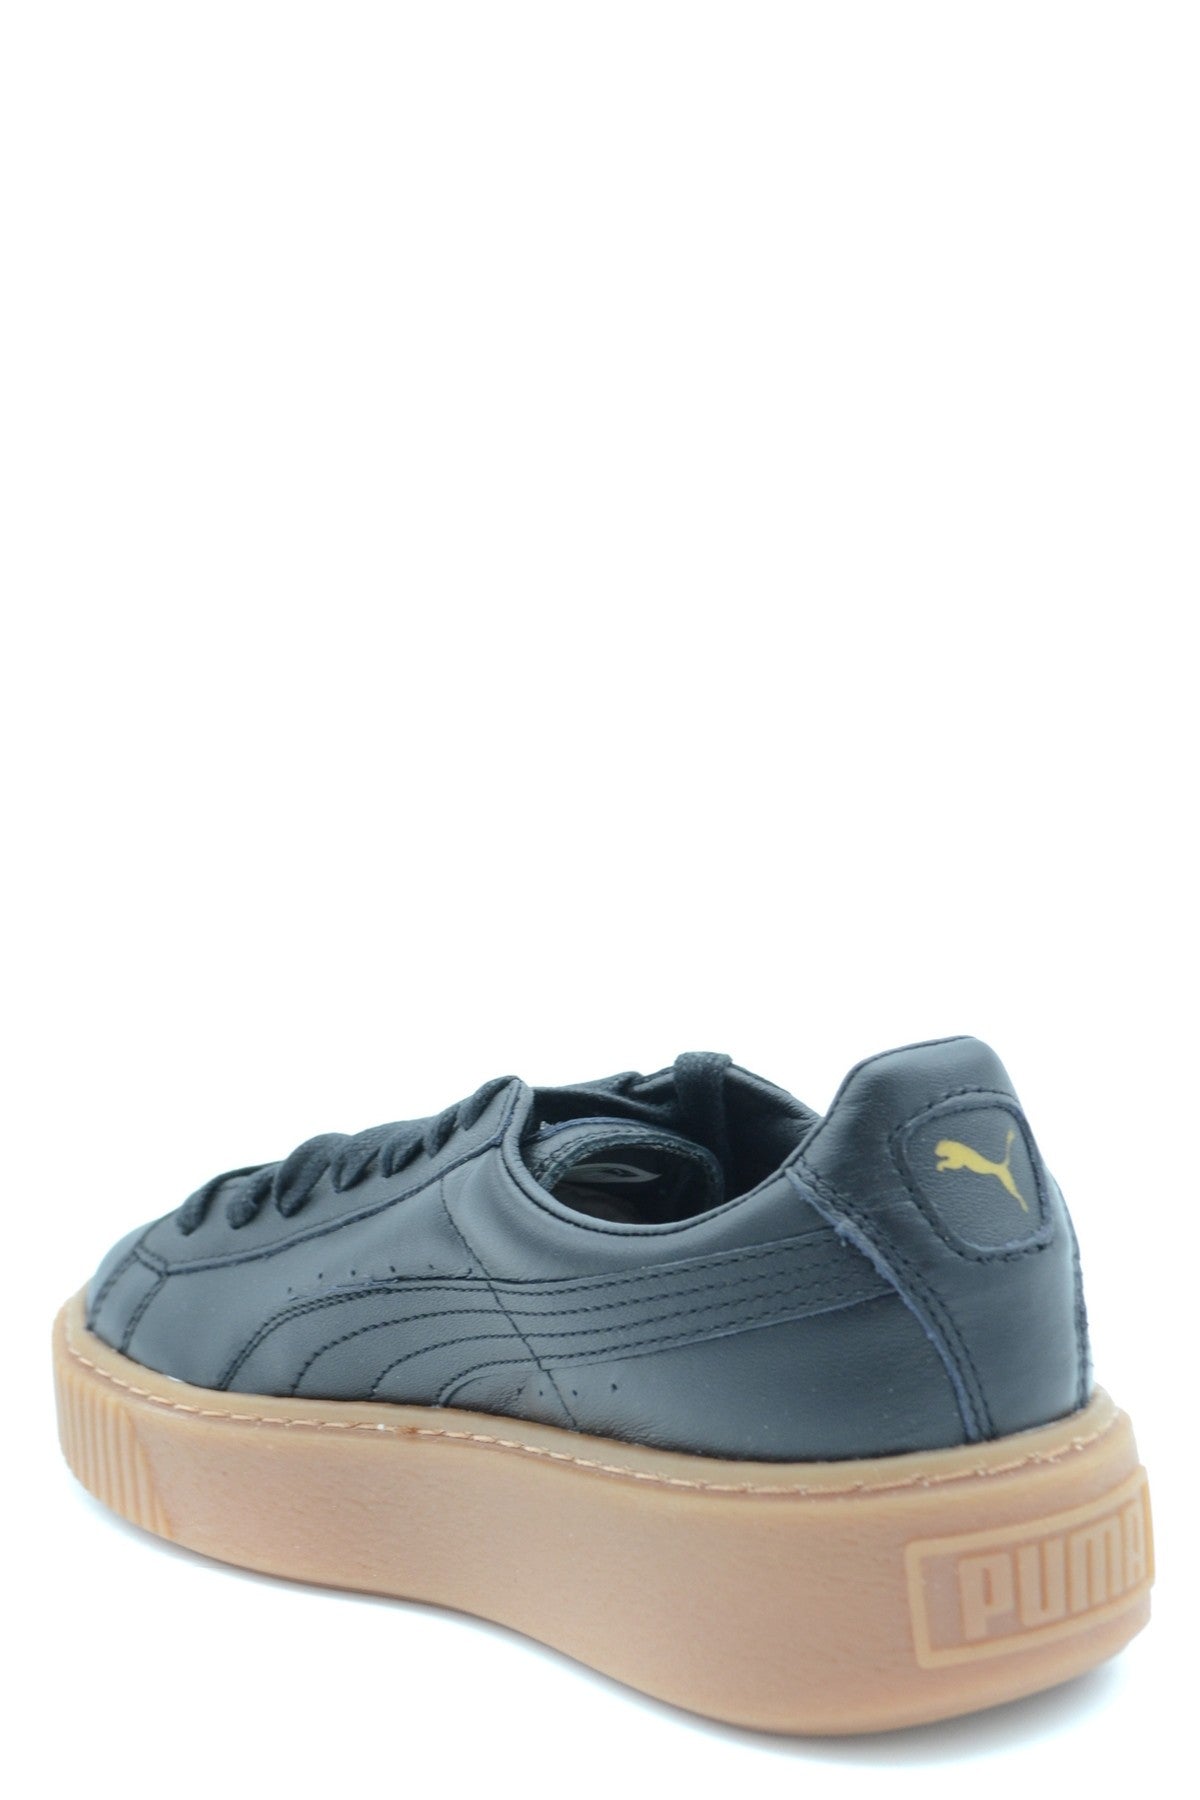 Puma Sneakers Donna